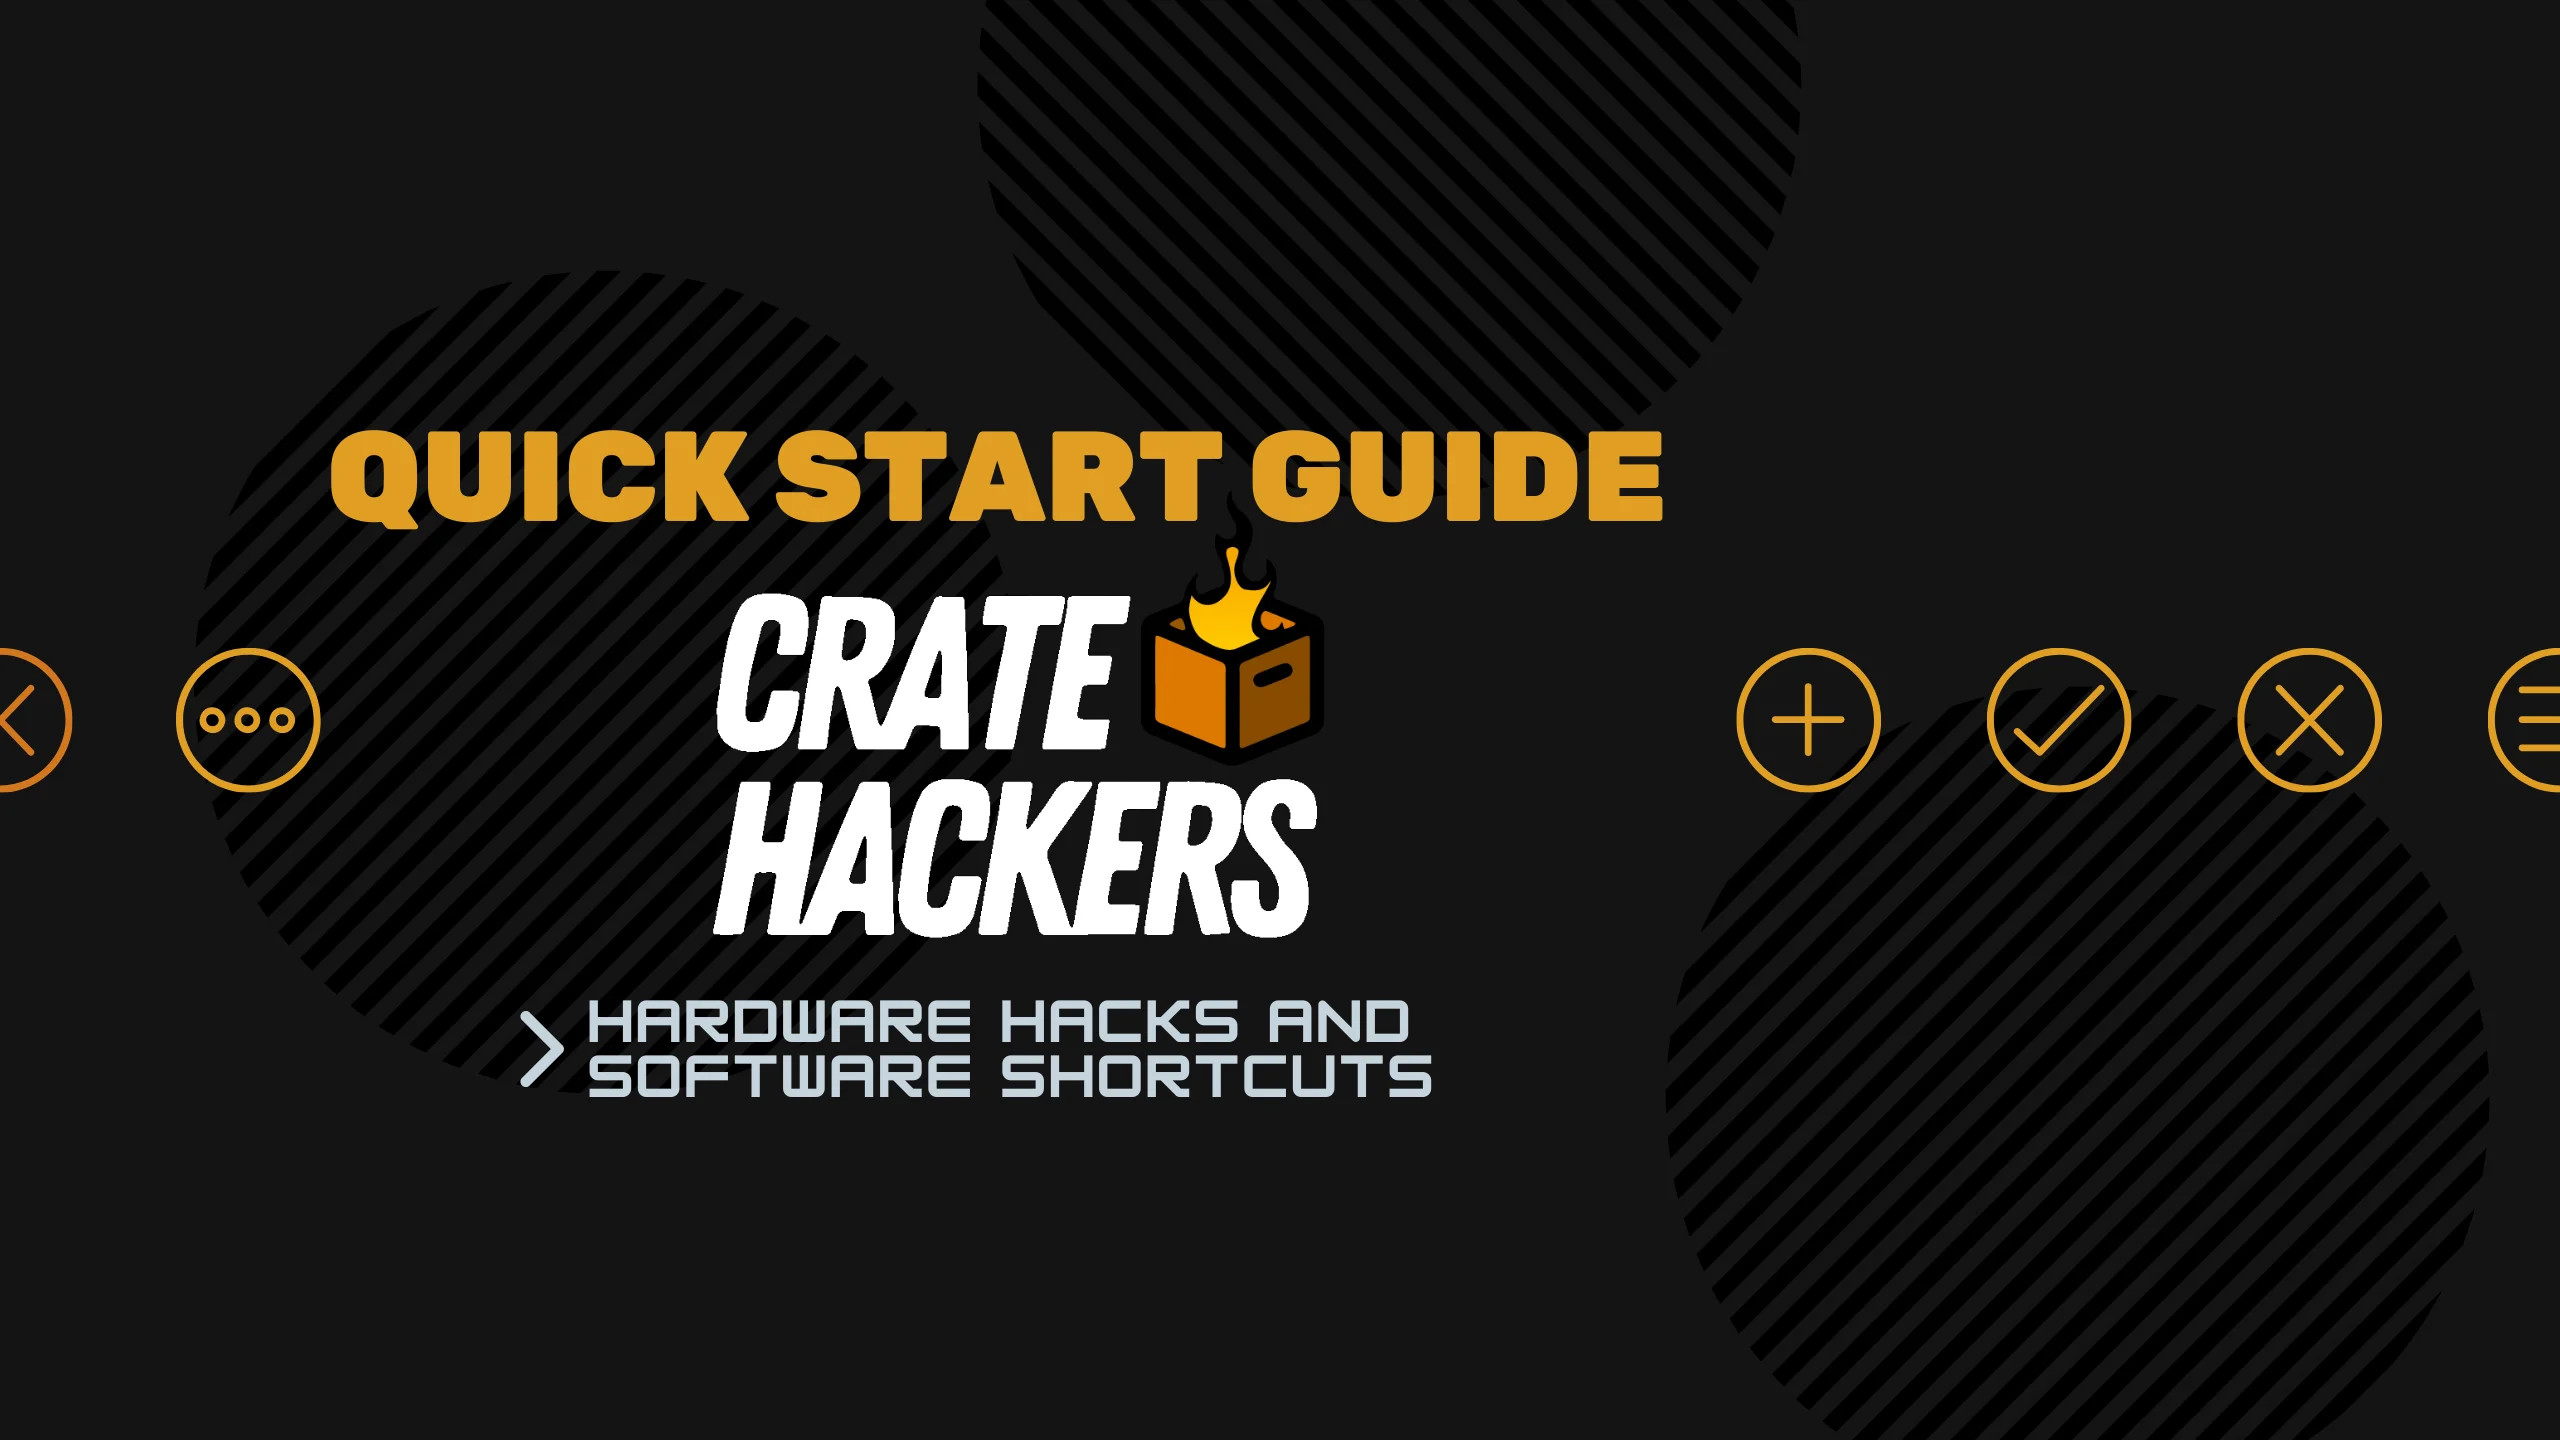 Crate Hackers (@cratehackers) • Instagram photos and videos